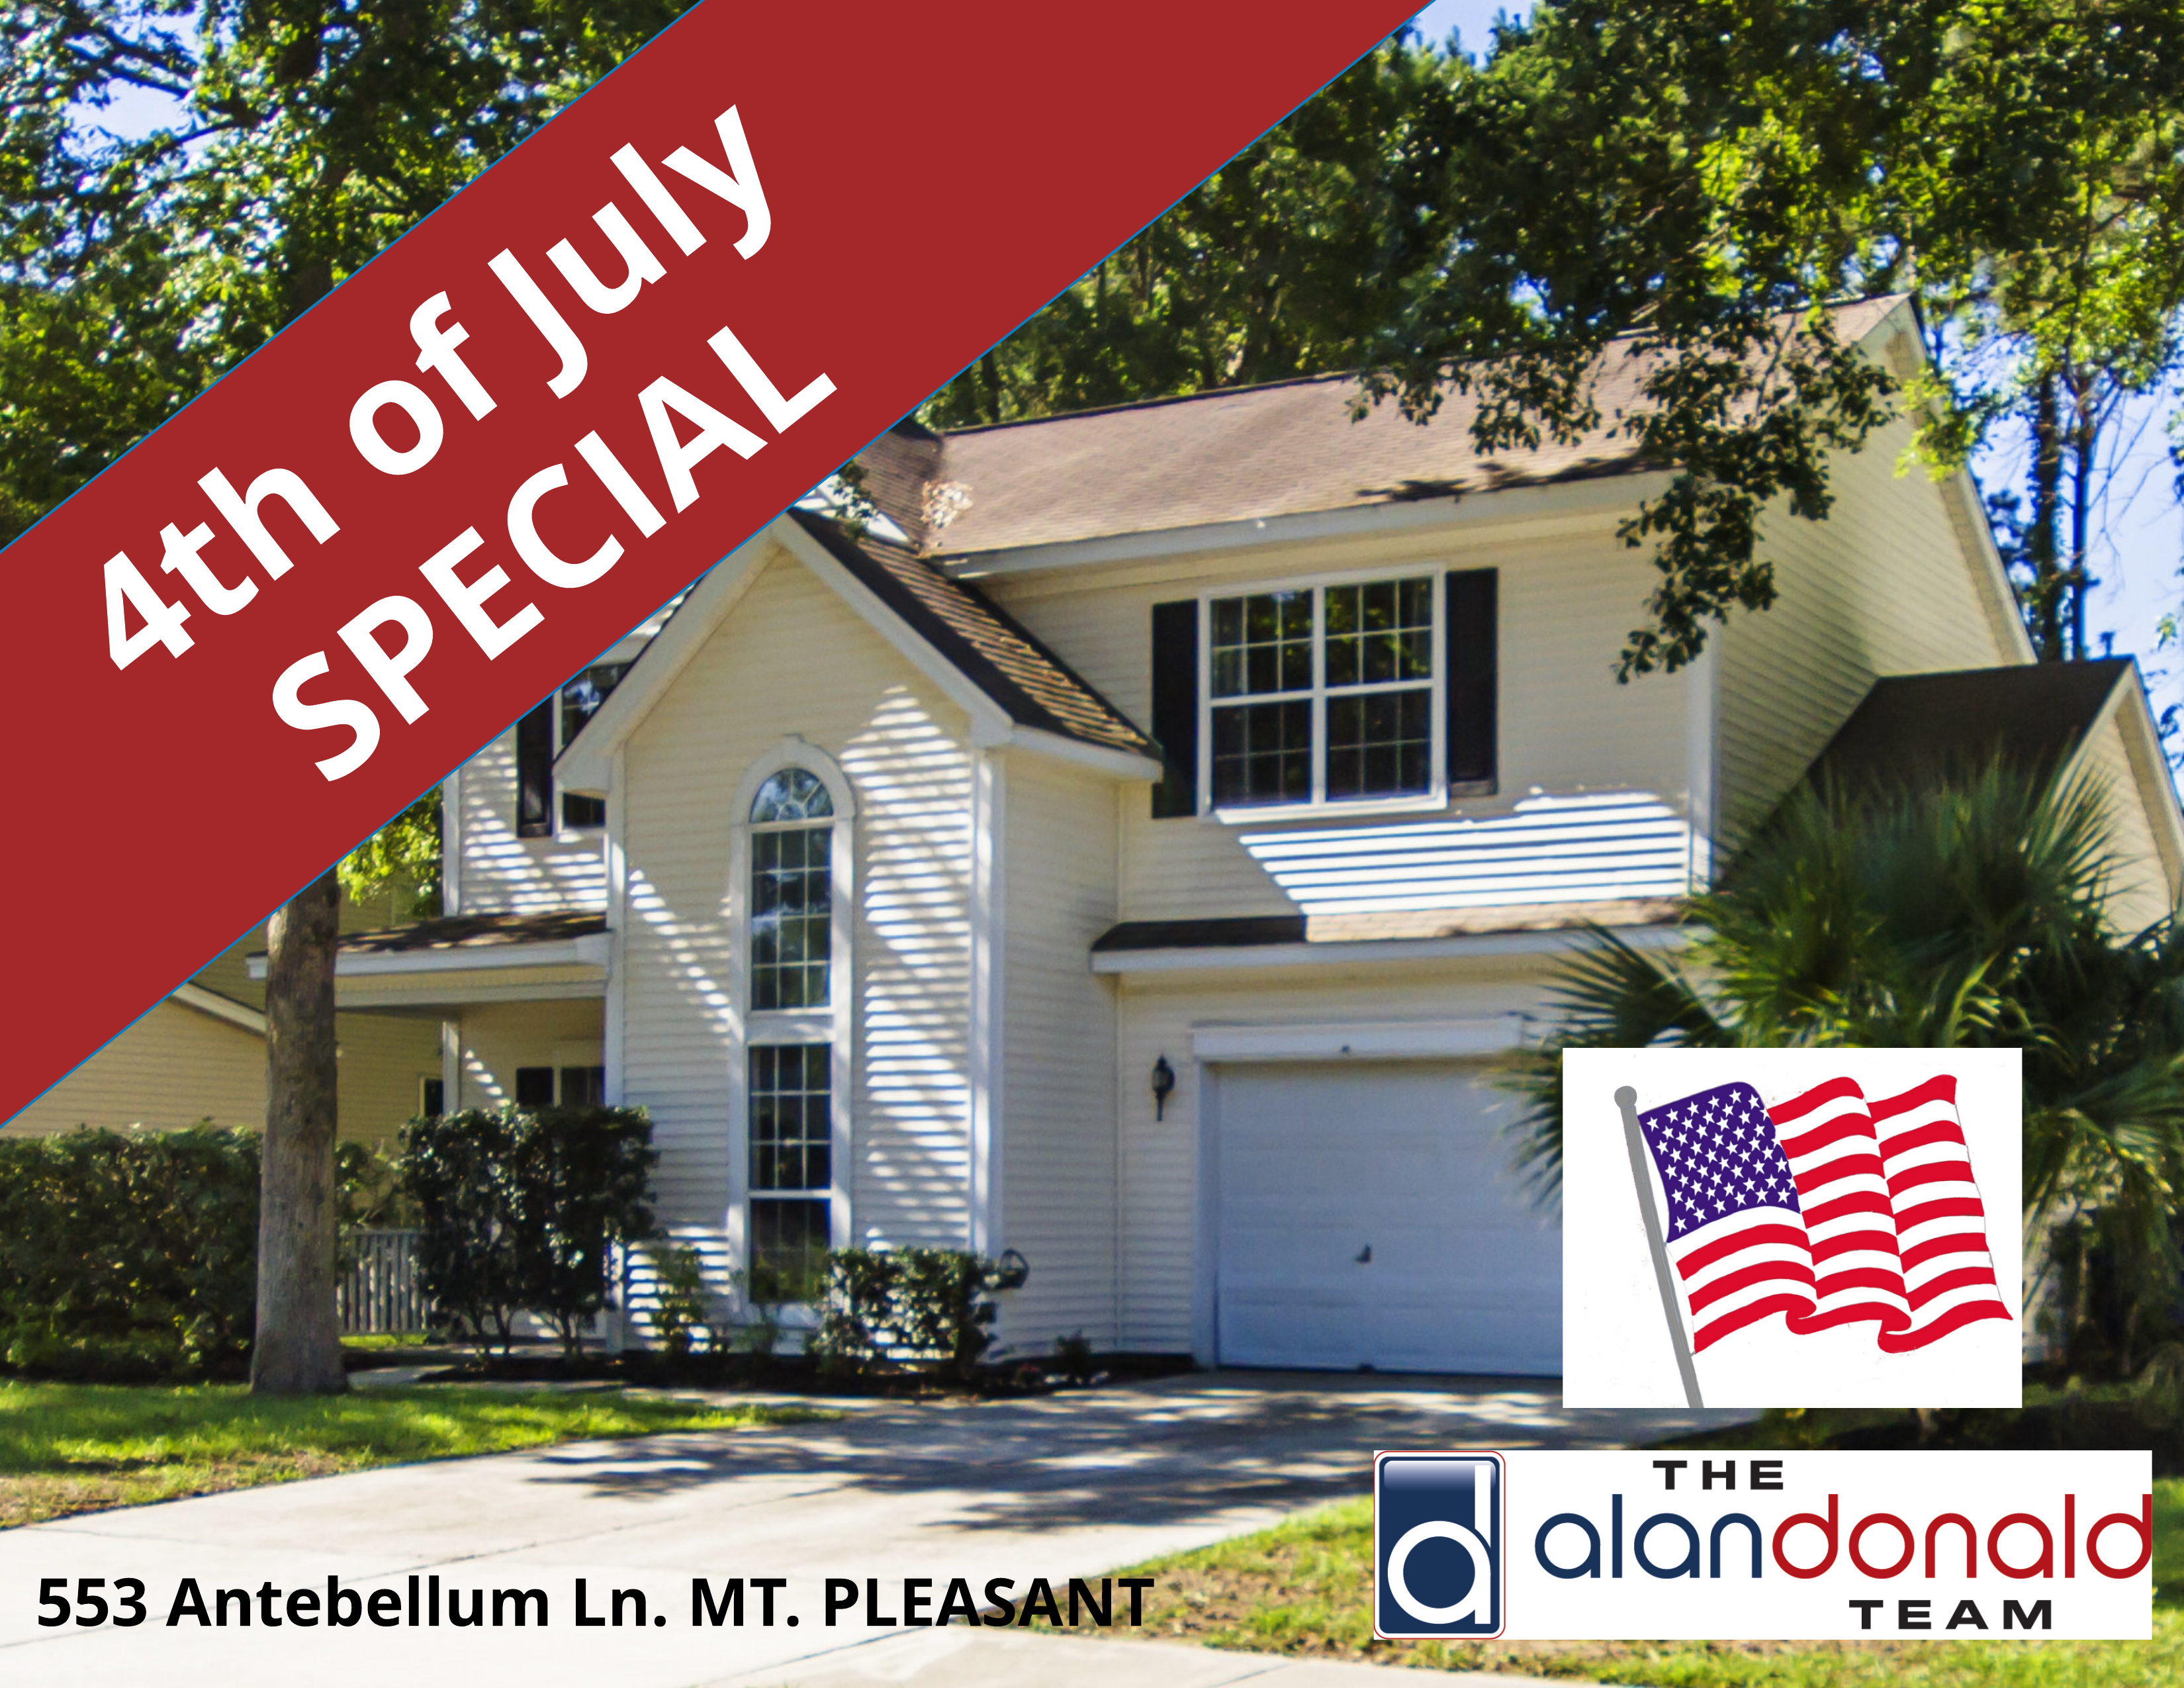 Belle Hall - July 4th SPECIAL!